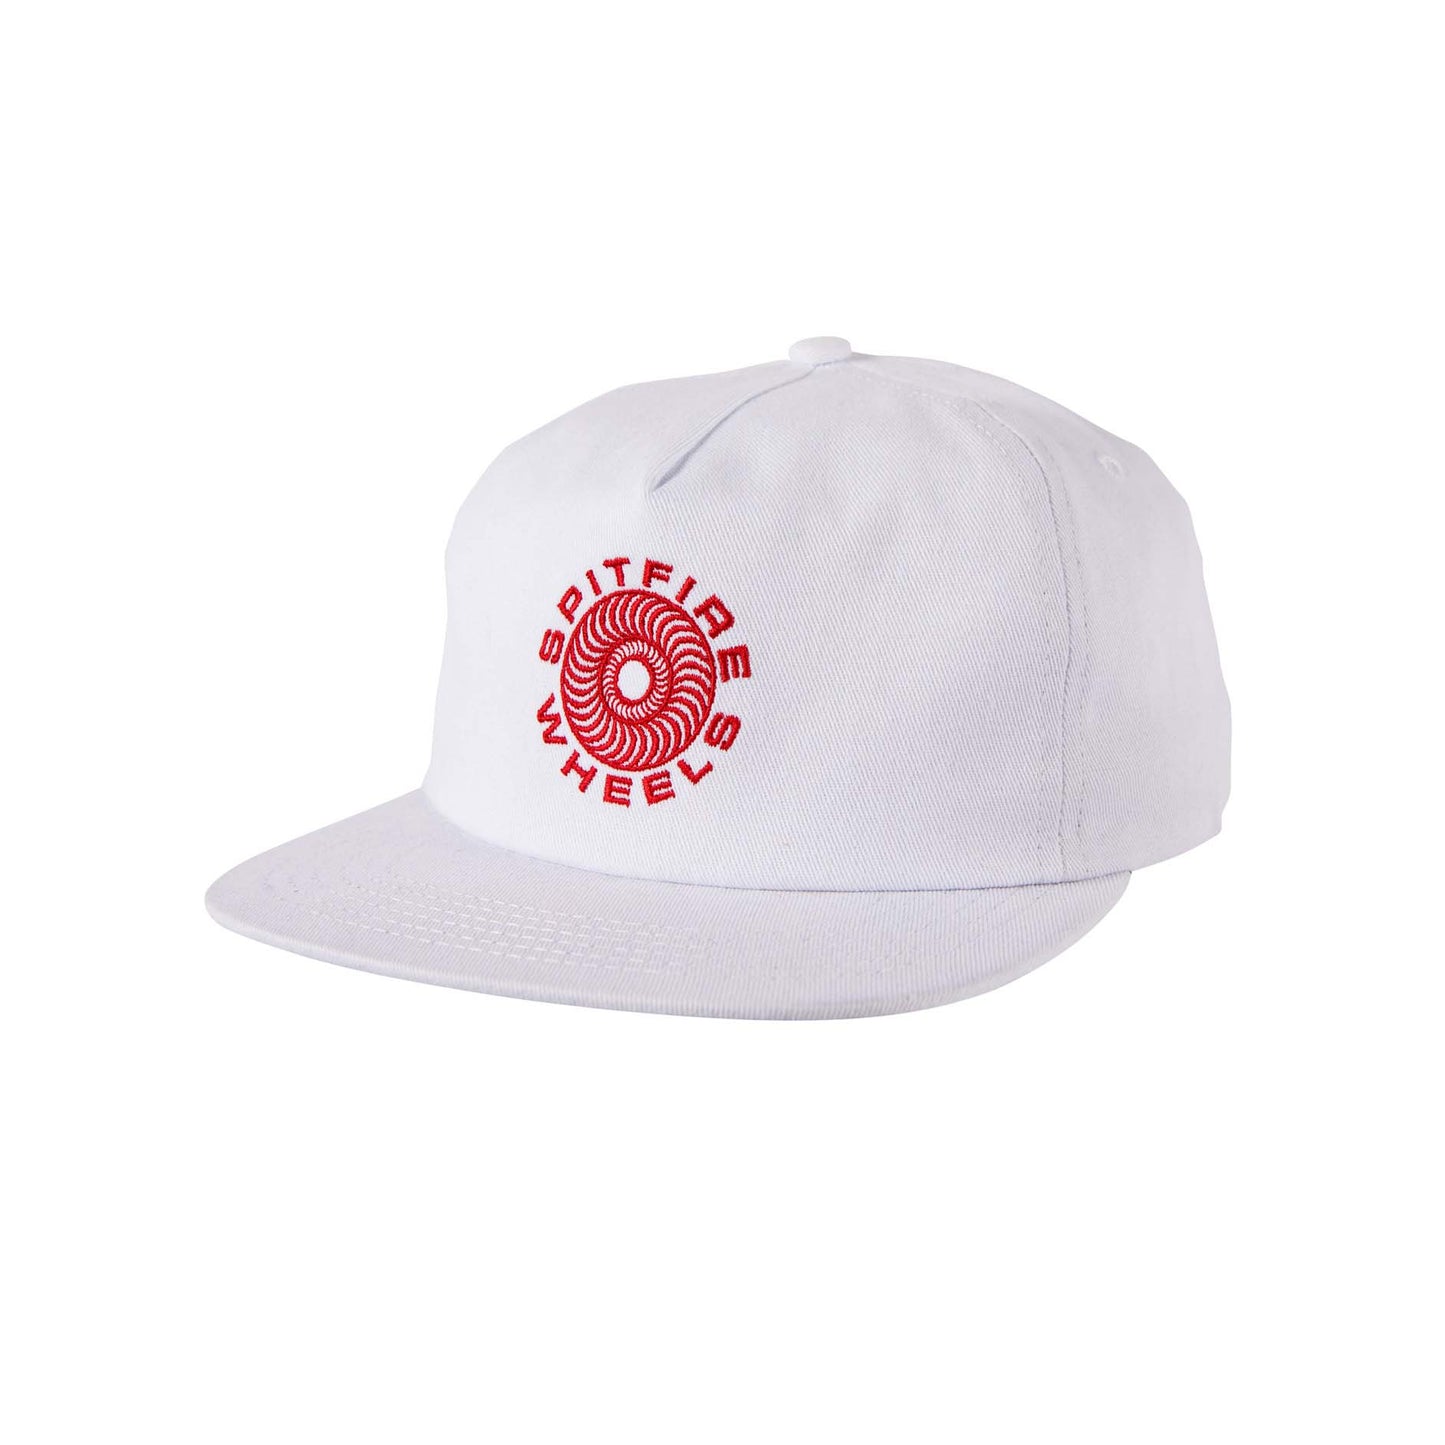 SPITFIRE - CLASSIC 87' SWIRL ADJUSTABLE CAP - WHITE/RED